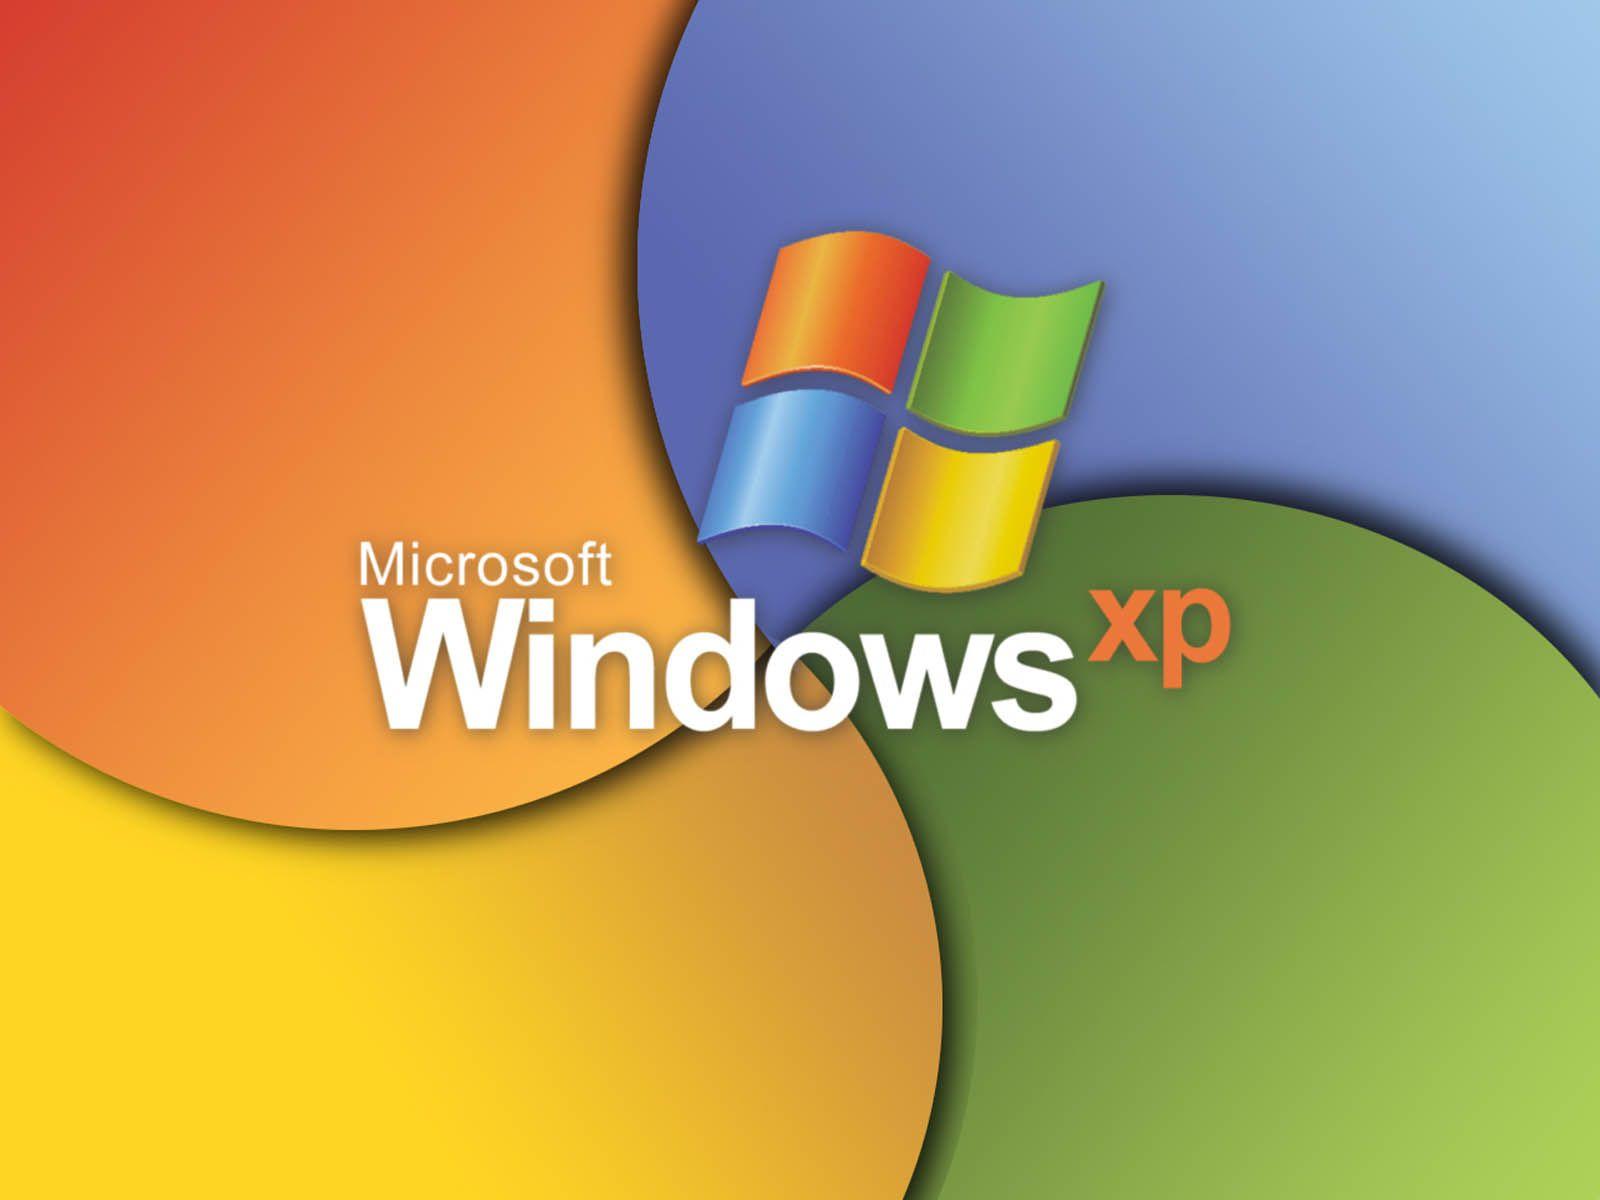 Cool Windows Logo - 50 Cool Windows XP Wallpapers In HD For Free Download